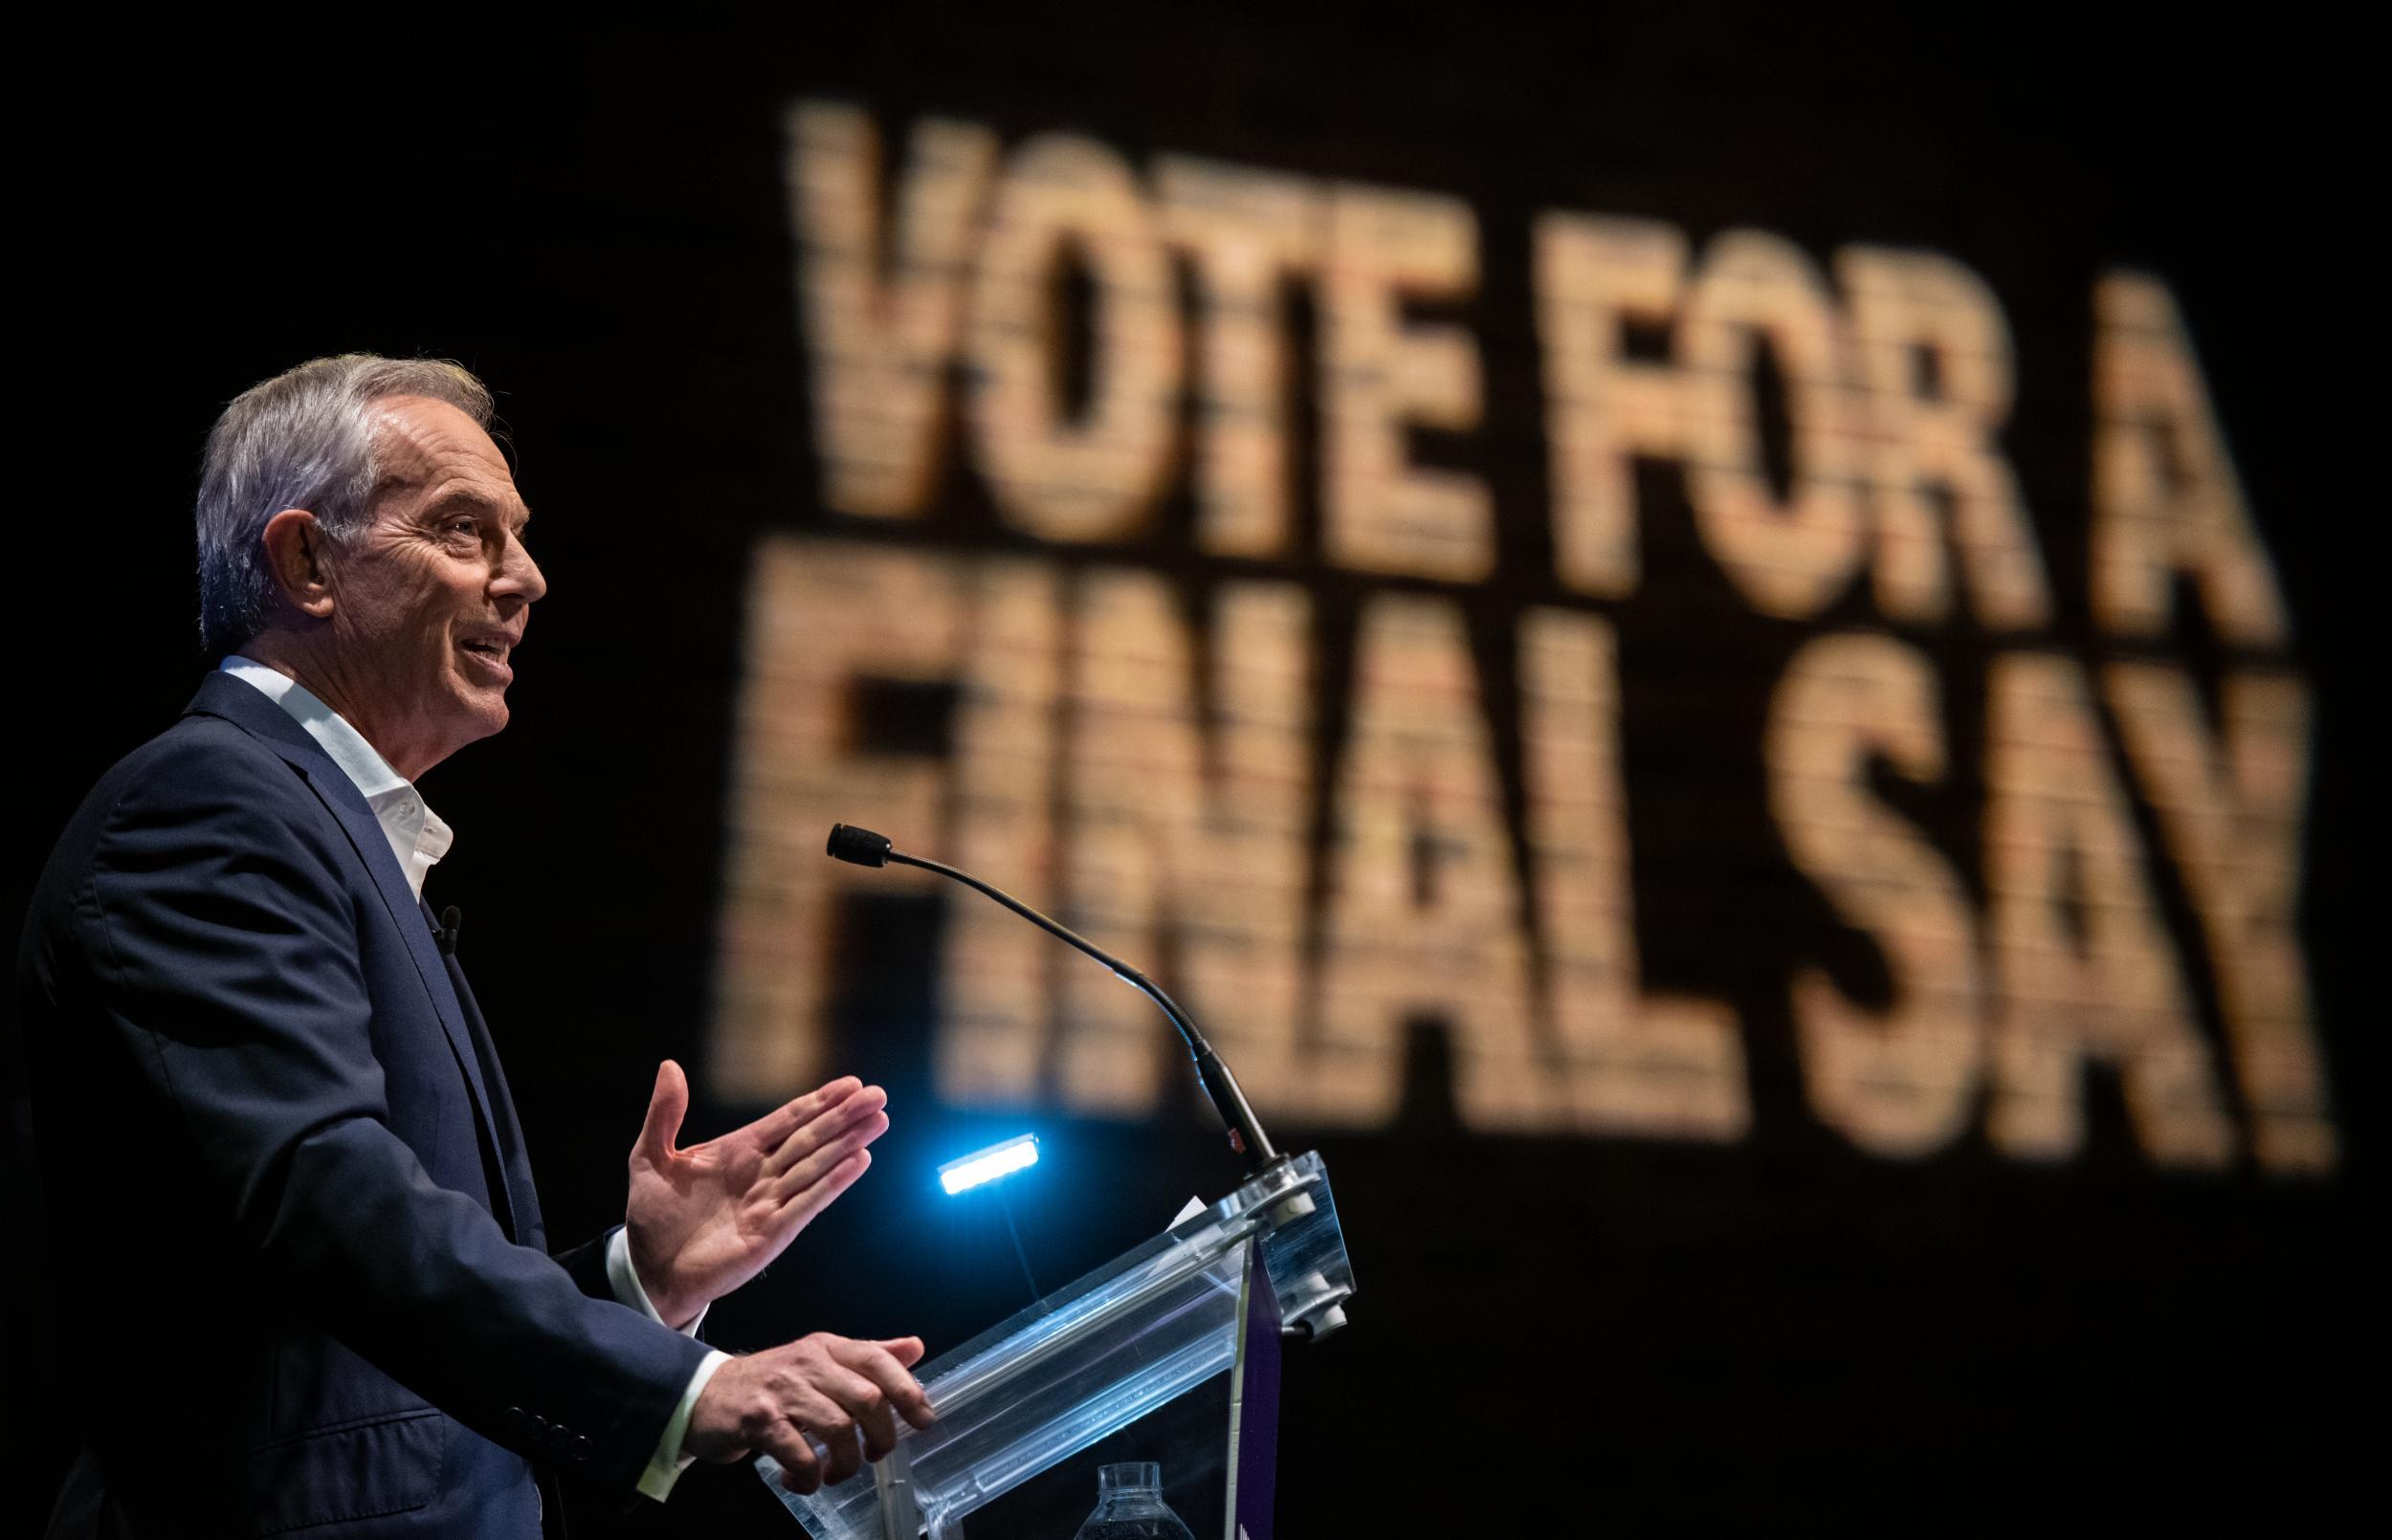 Tony Blair was also speaking at the event in London